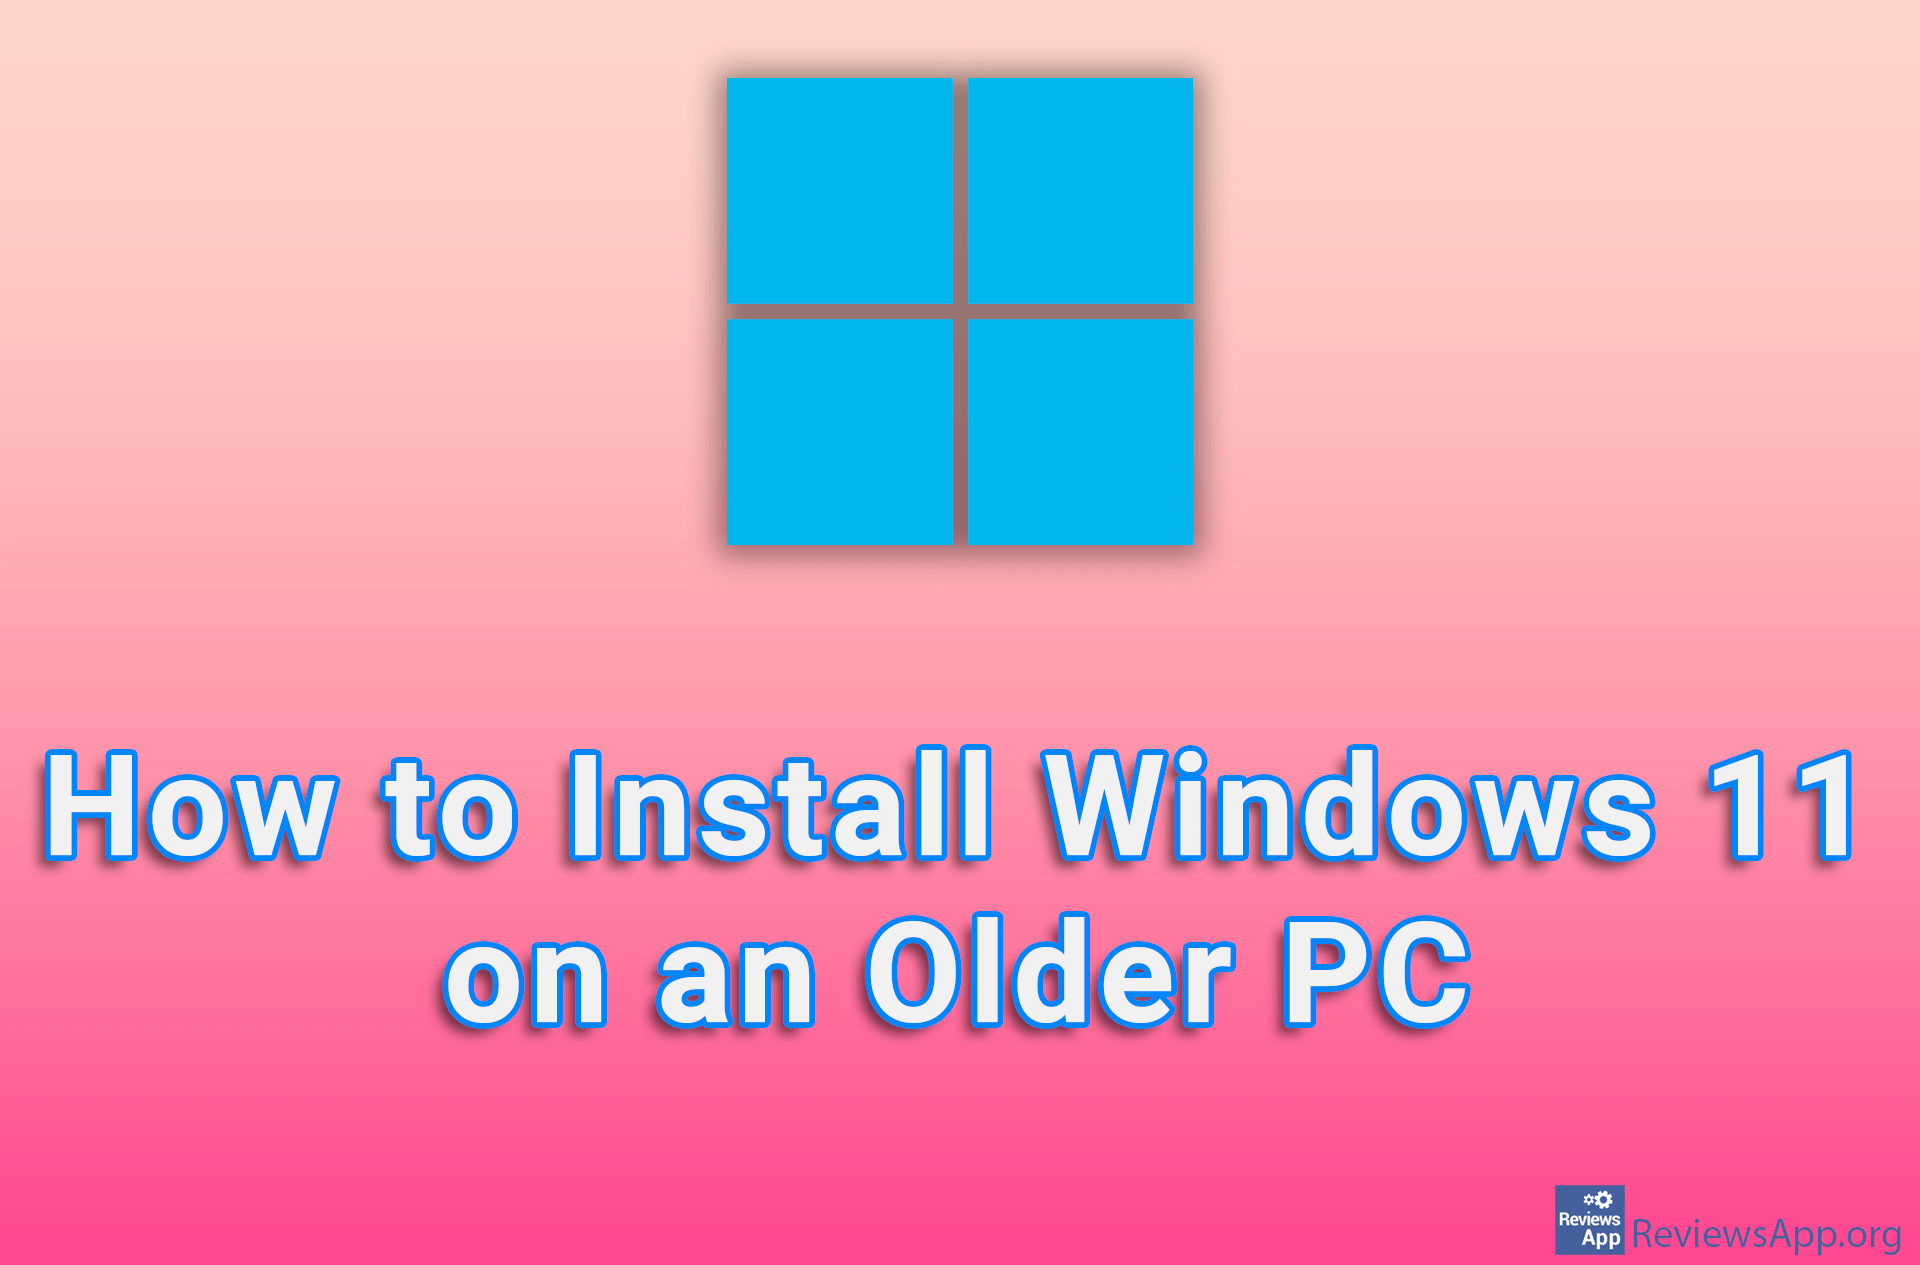 How to Install Windows 11 on an Older PC